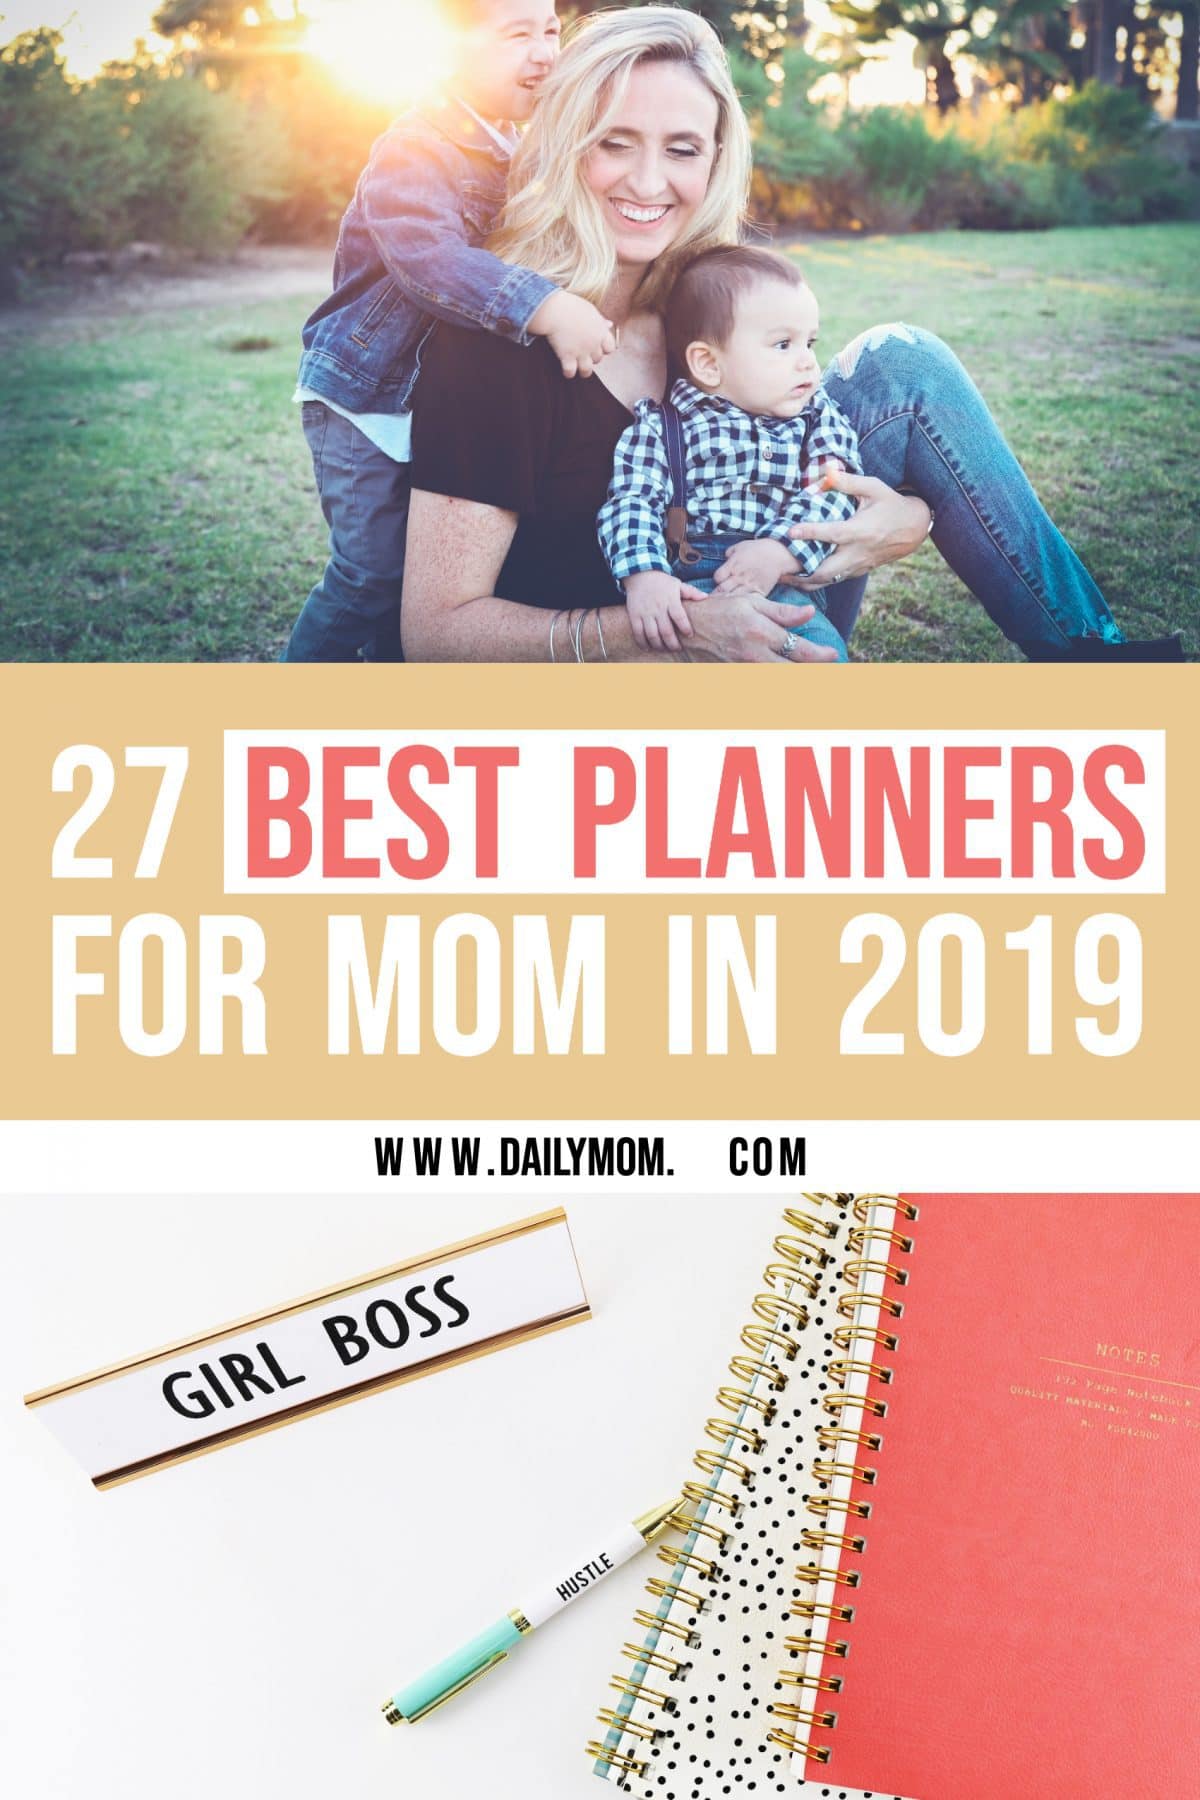 daily-mom-parent-portal-27 Best Planners For Mom